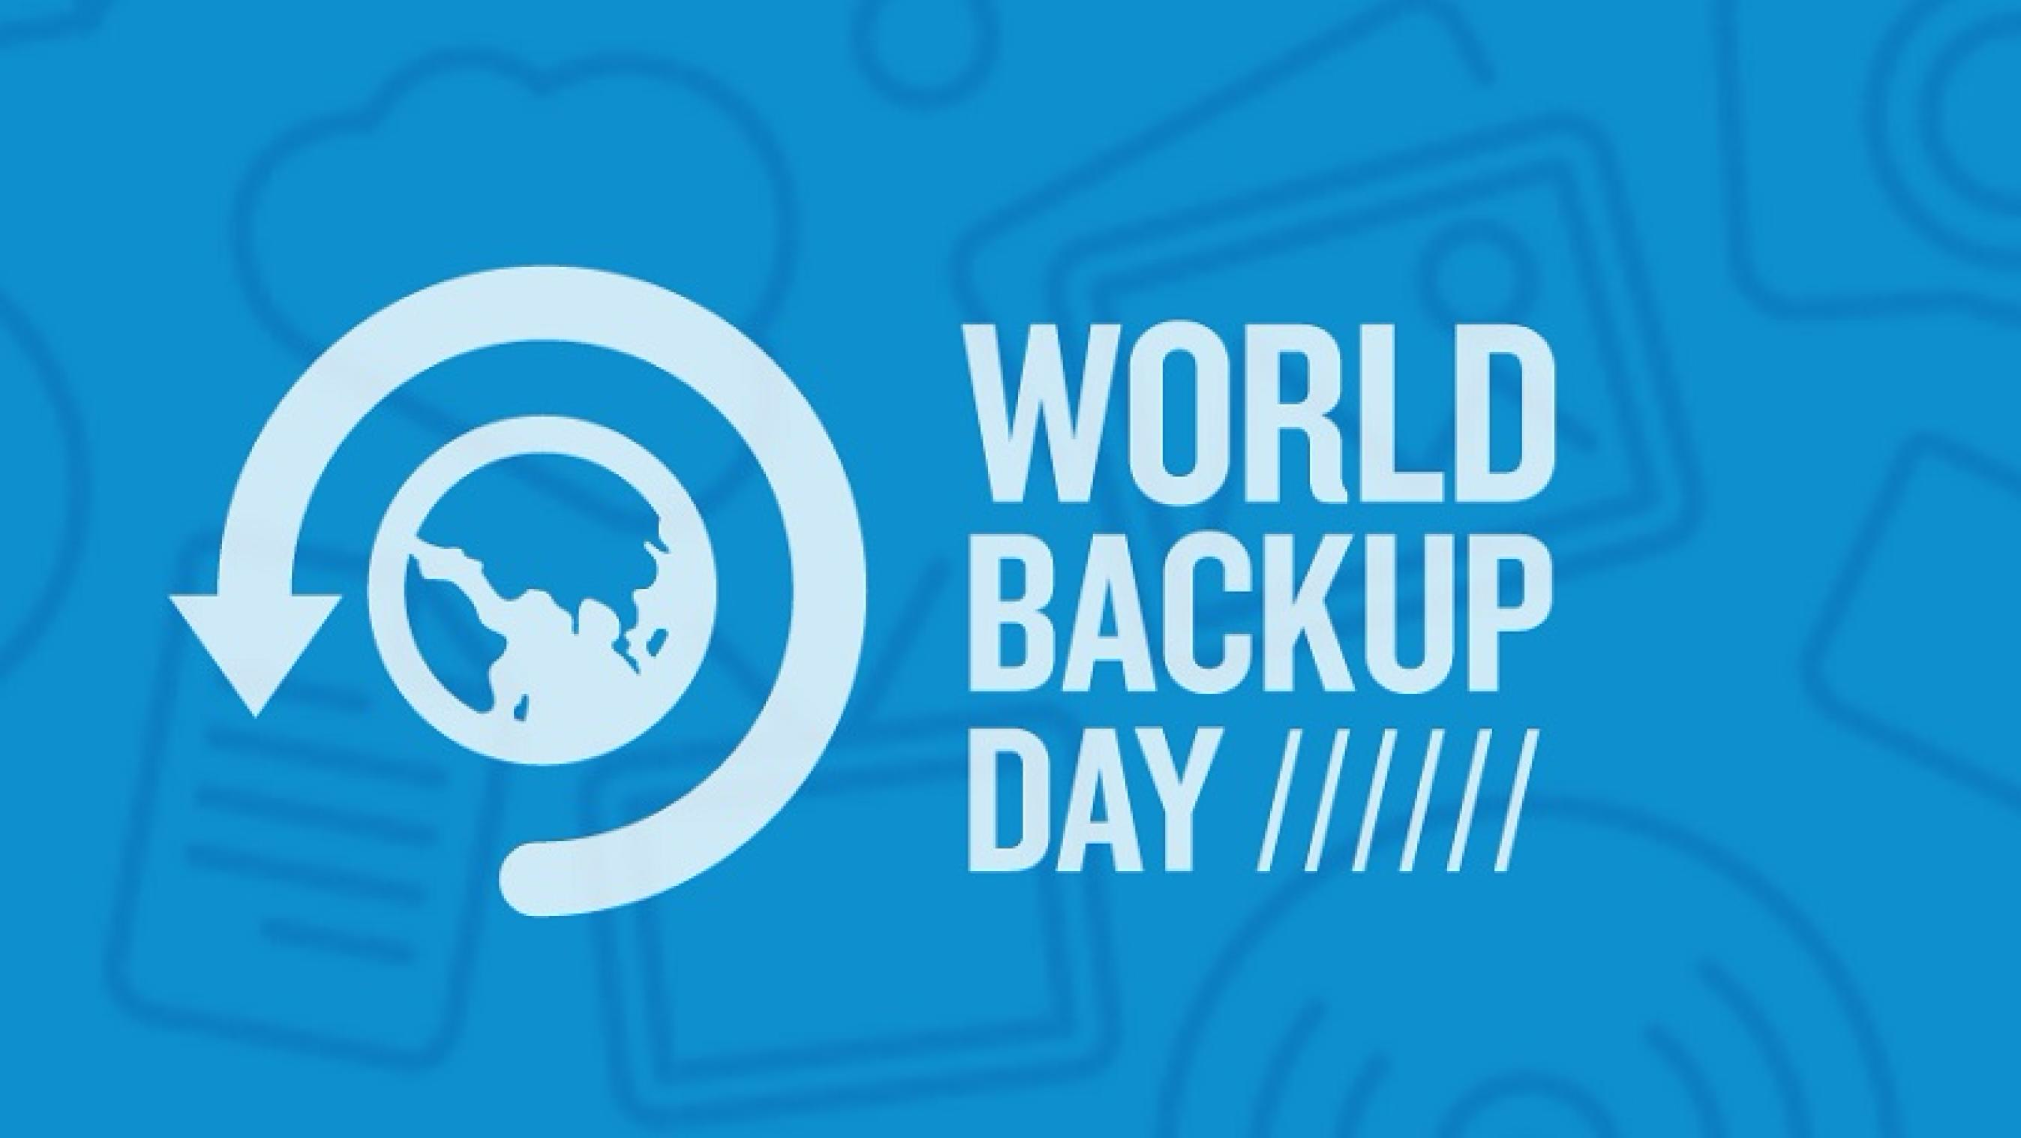 World Backup Day, March 31st